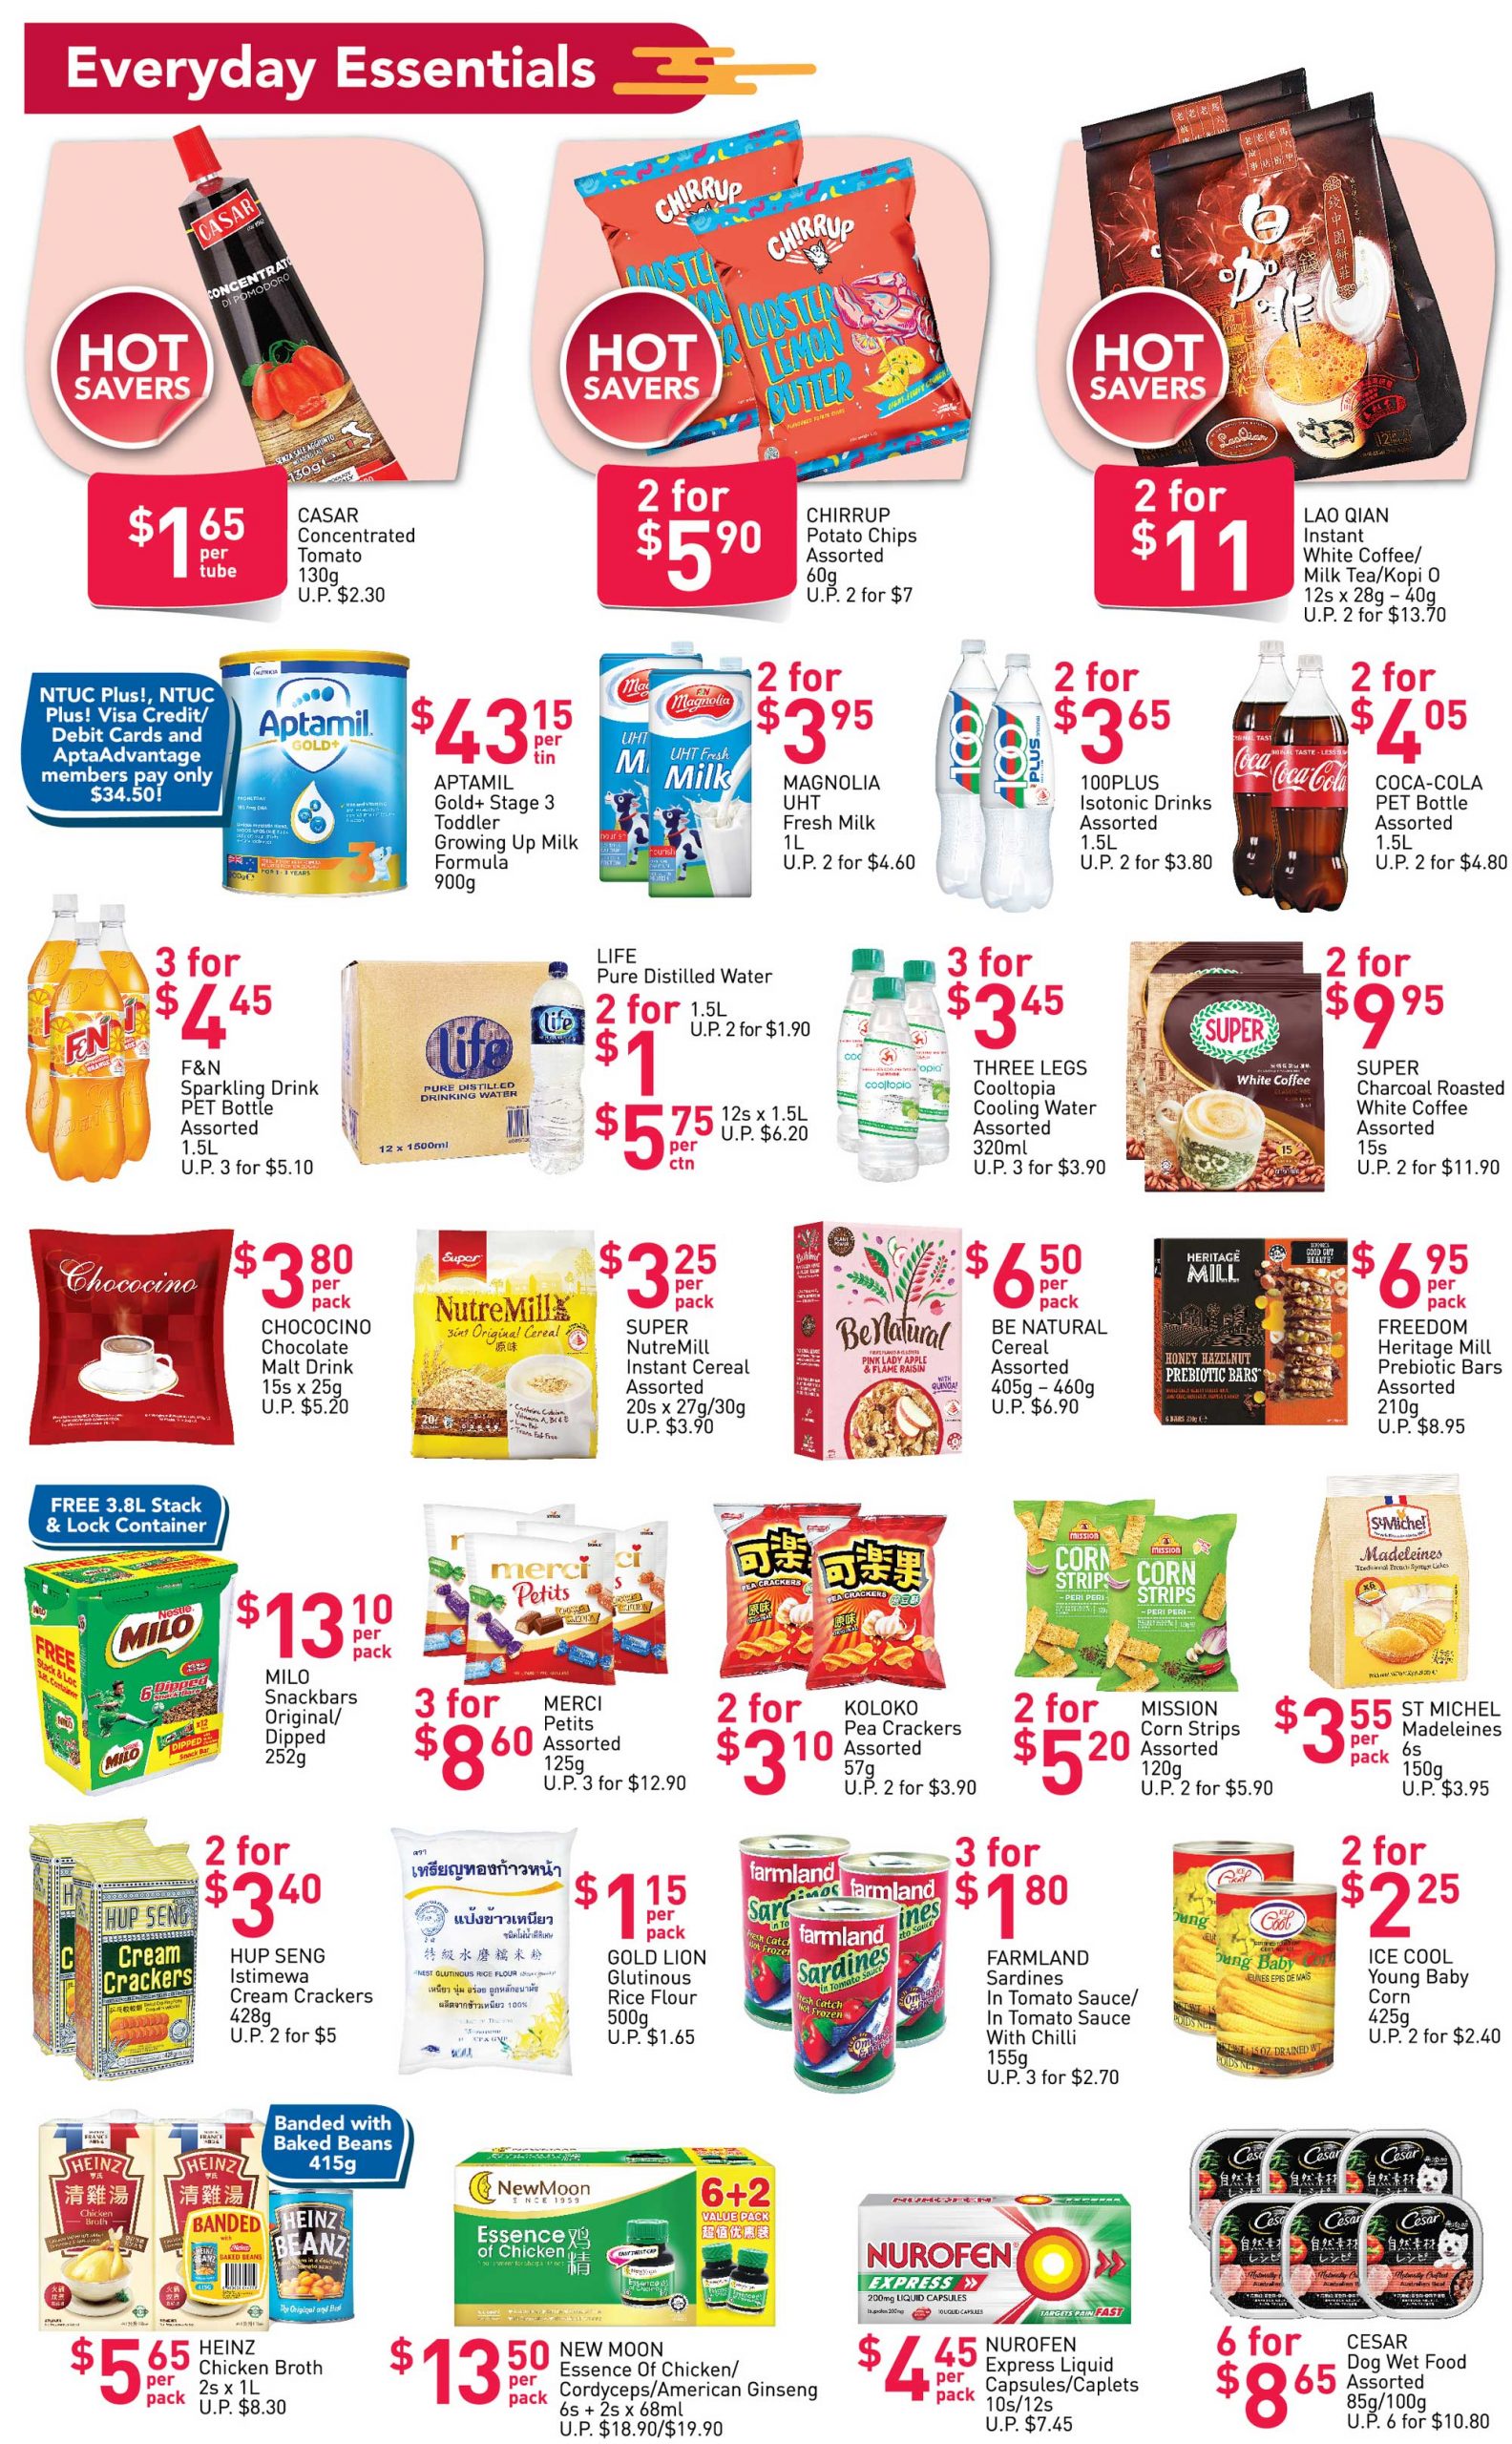 FairPrice’s weekly saver deals till 3 March 2021